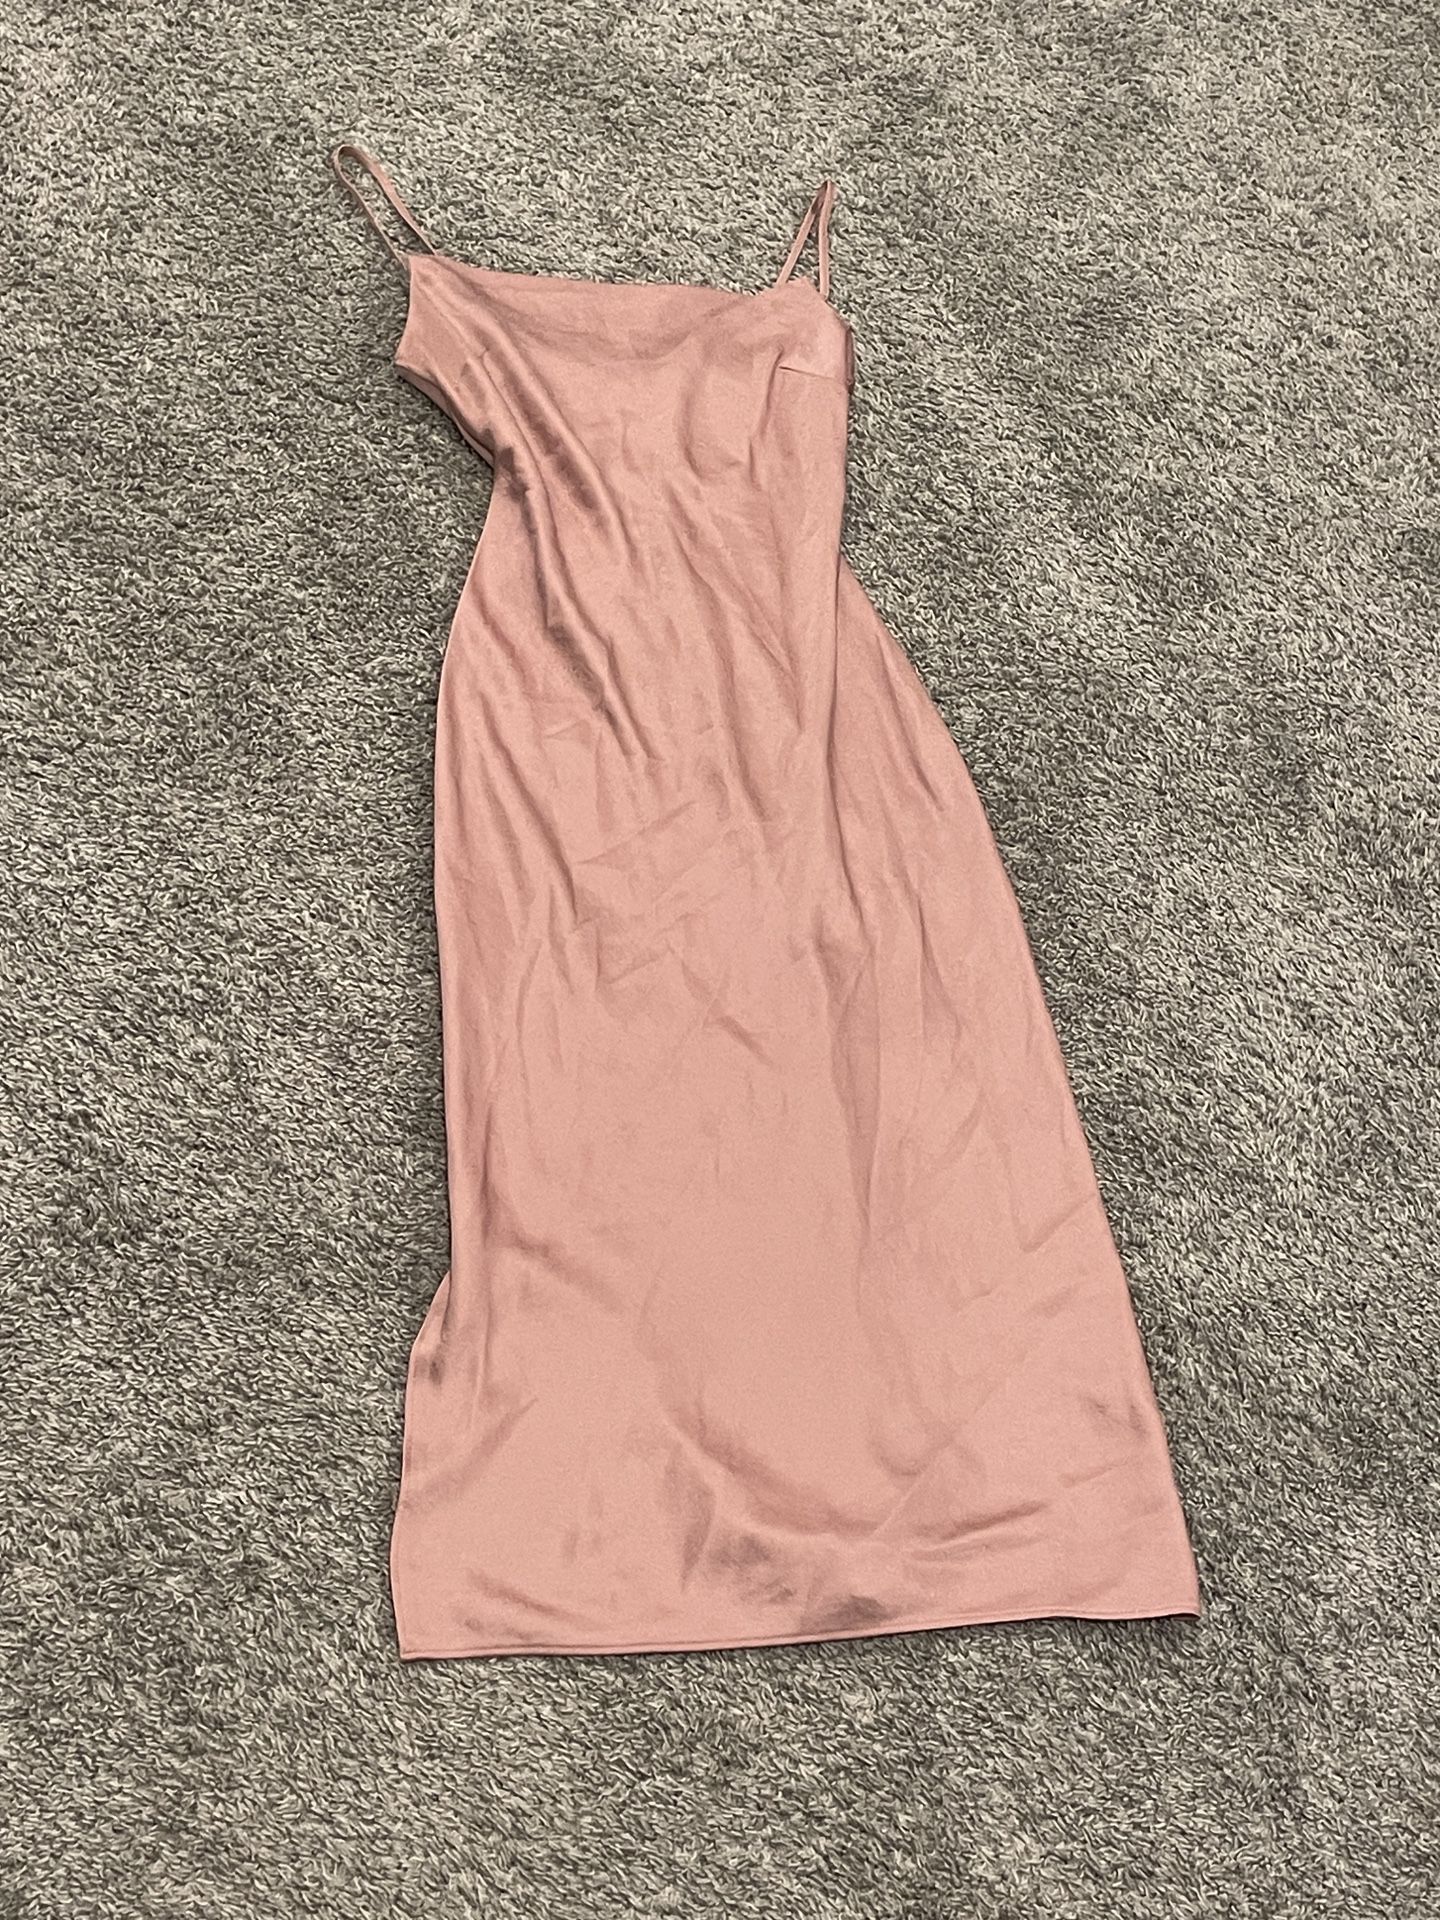 NWOT Express Maxi Dress With Slit Up One Leg Rose Gold Size S